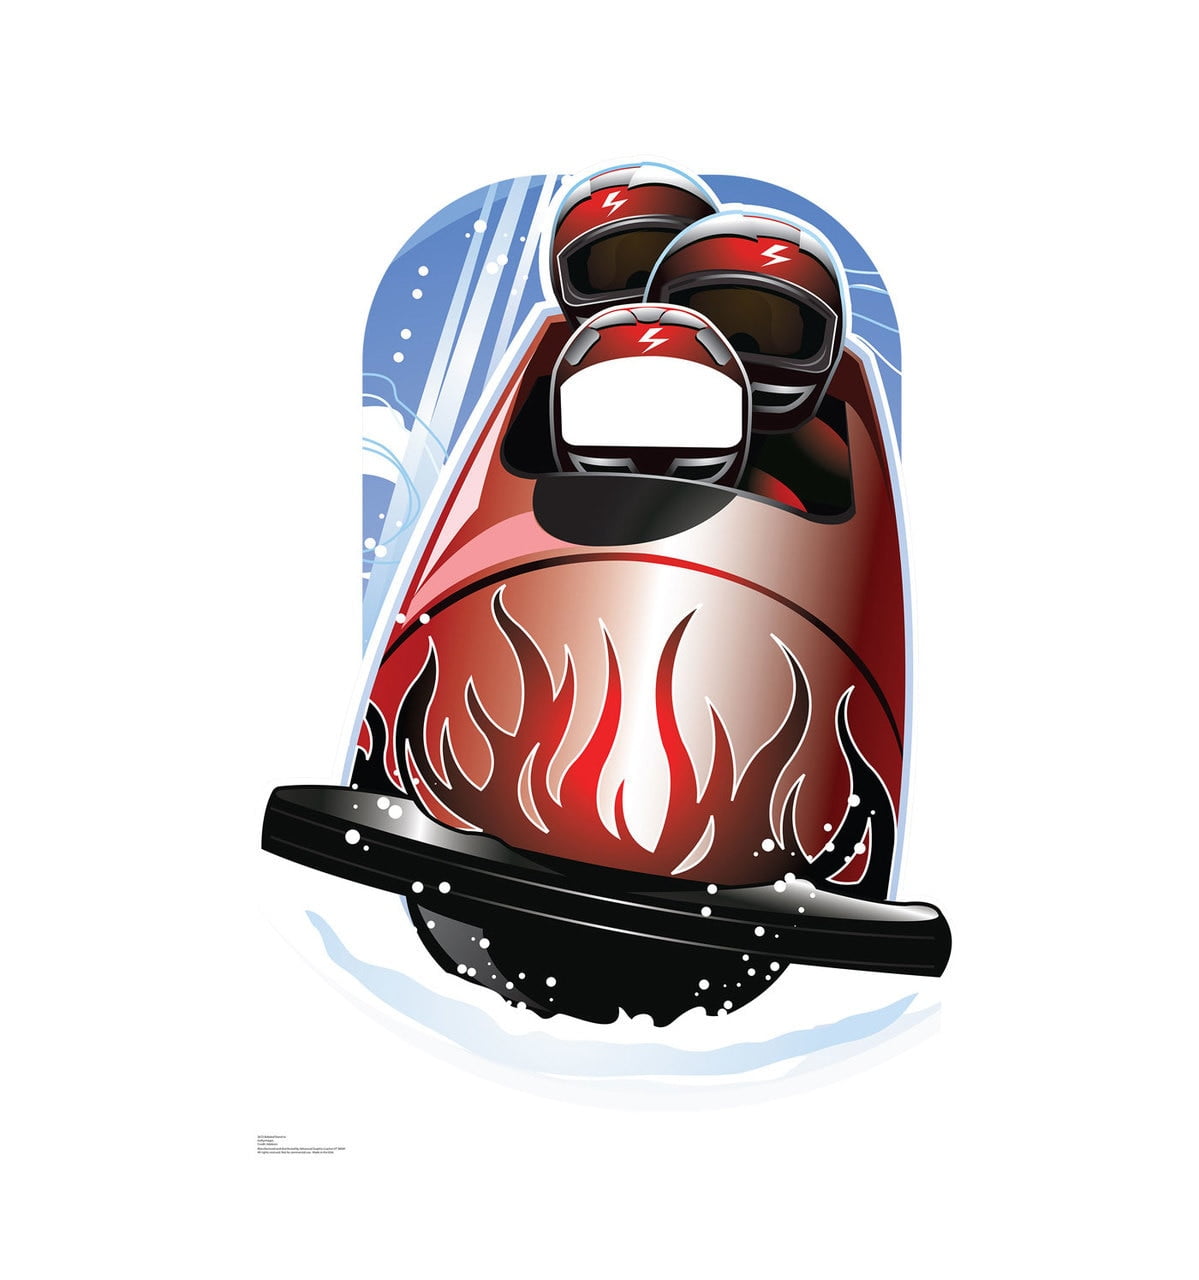 2672 55 X 39 In. Bobsled Standin Wall Decal